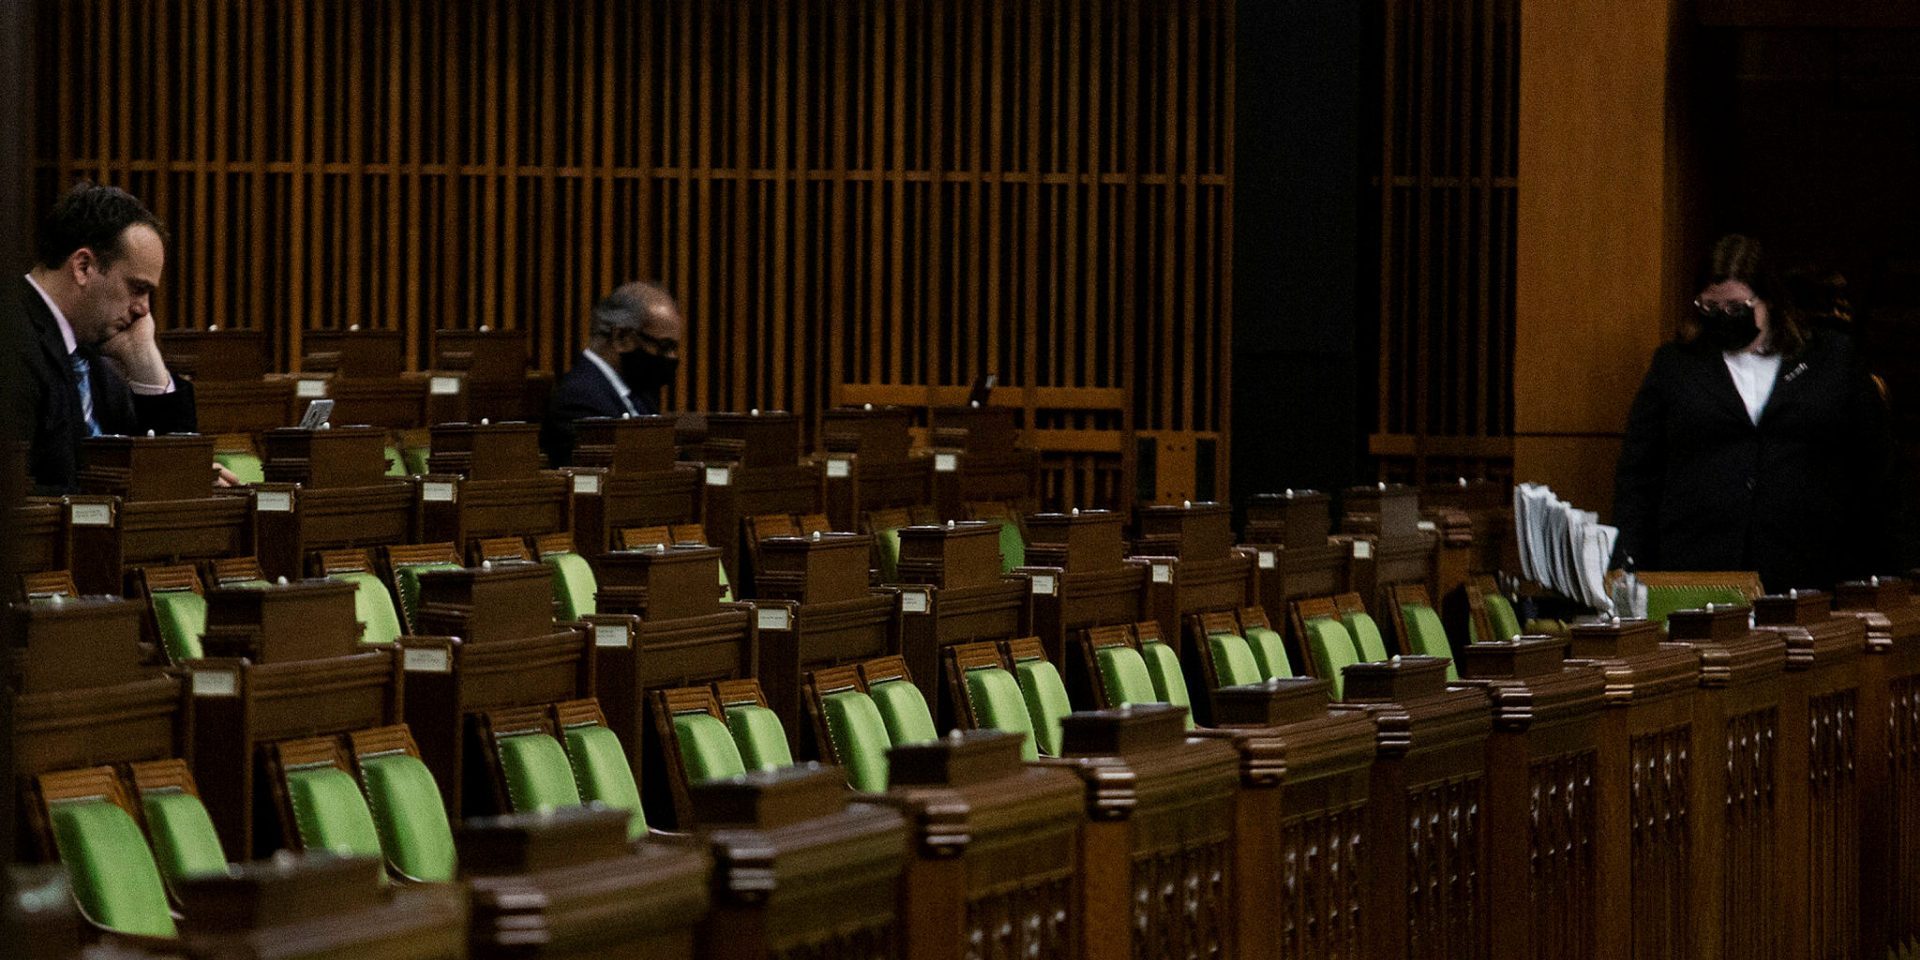 Members’ seats sit empty for Question Period in West Block on Feb. 24, 2021 as a result of virtual hybrid sittings due to COVID-19.